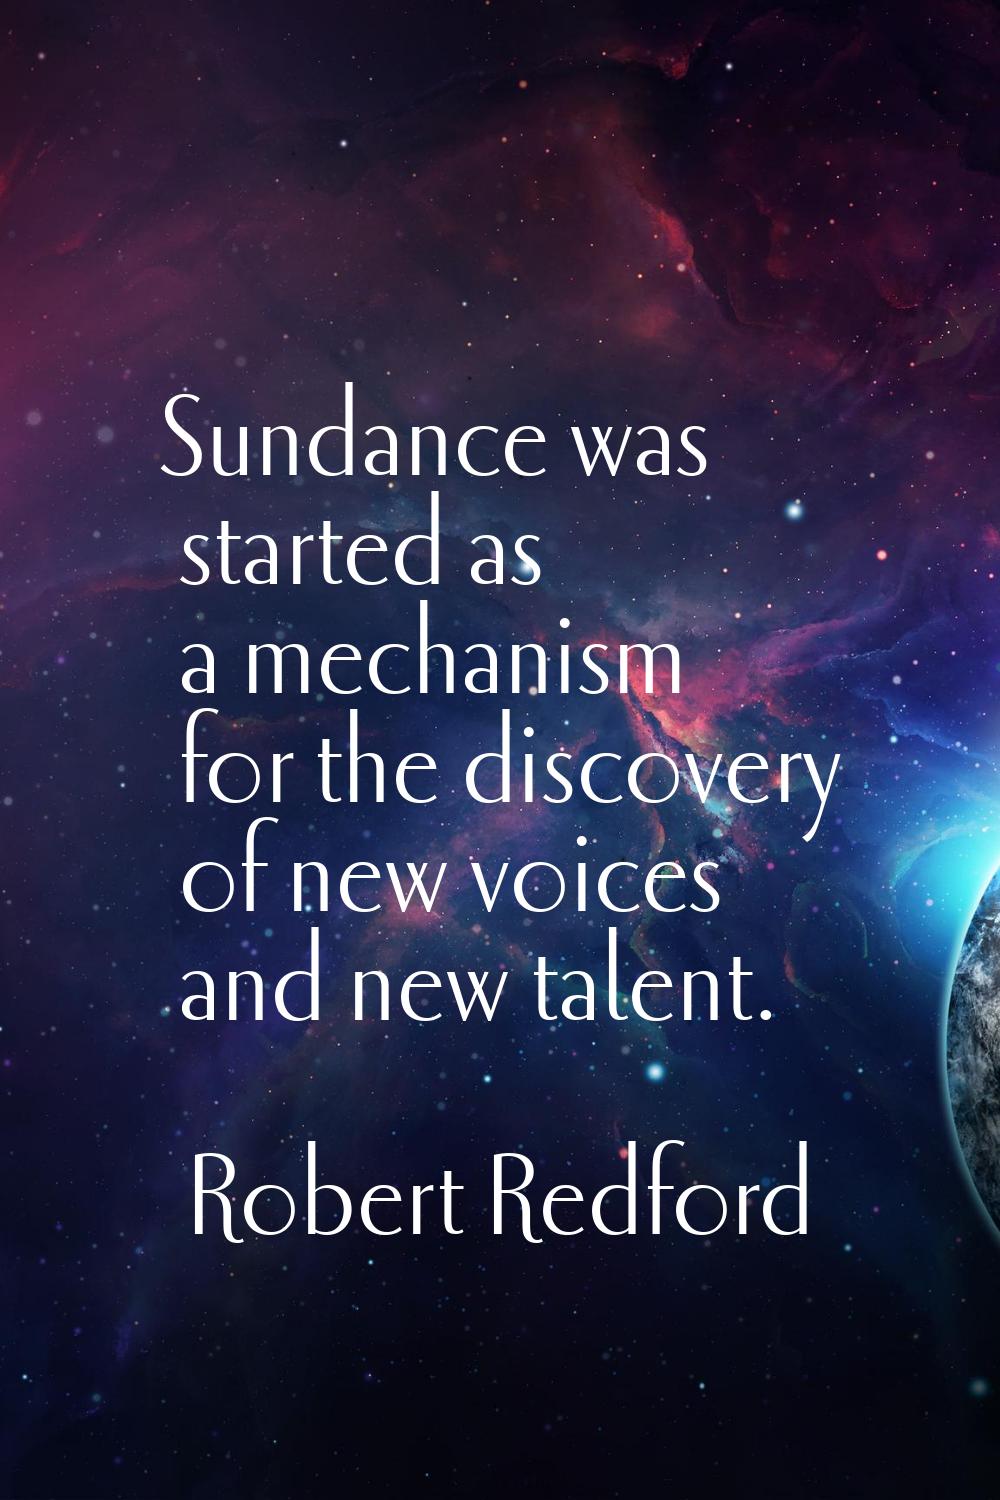 Sundance was started as a mechanism for the discovery of new voices and new talent.